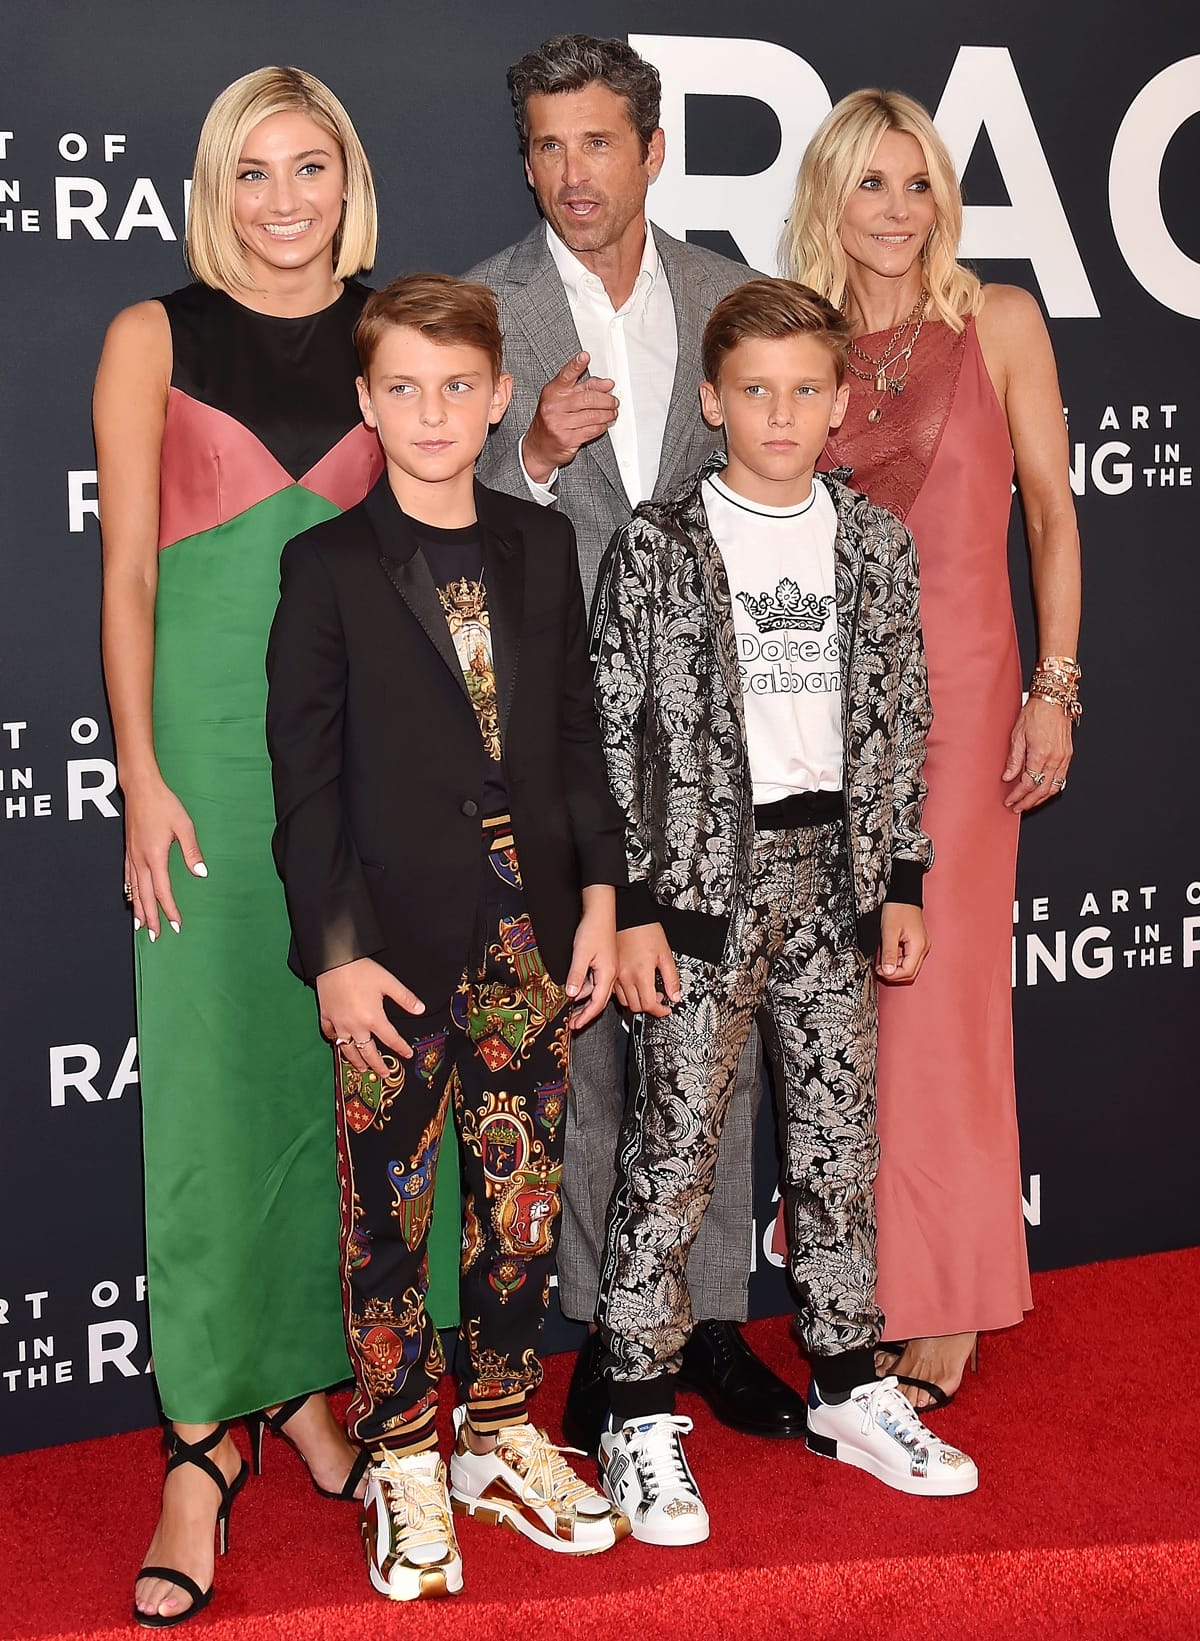 Patrick Dempsey with his wife Jillian Fink Dempsey and their daughter Talula Fyfe and twin sons Sullivan Patrick and Darby Galen